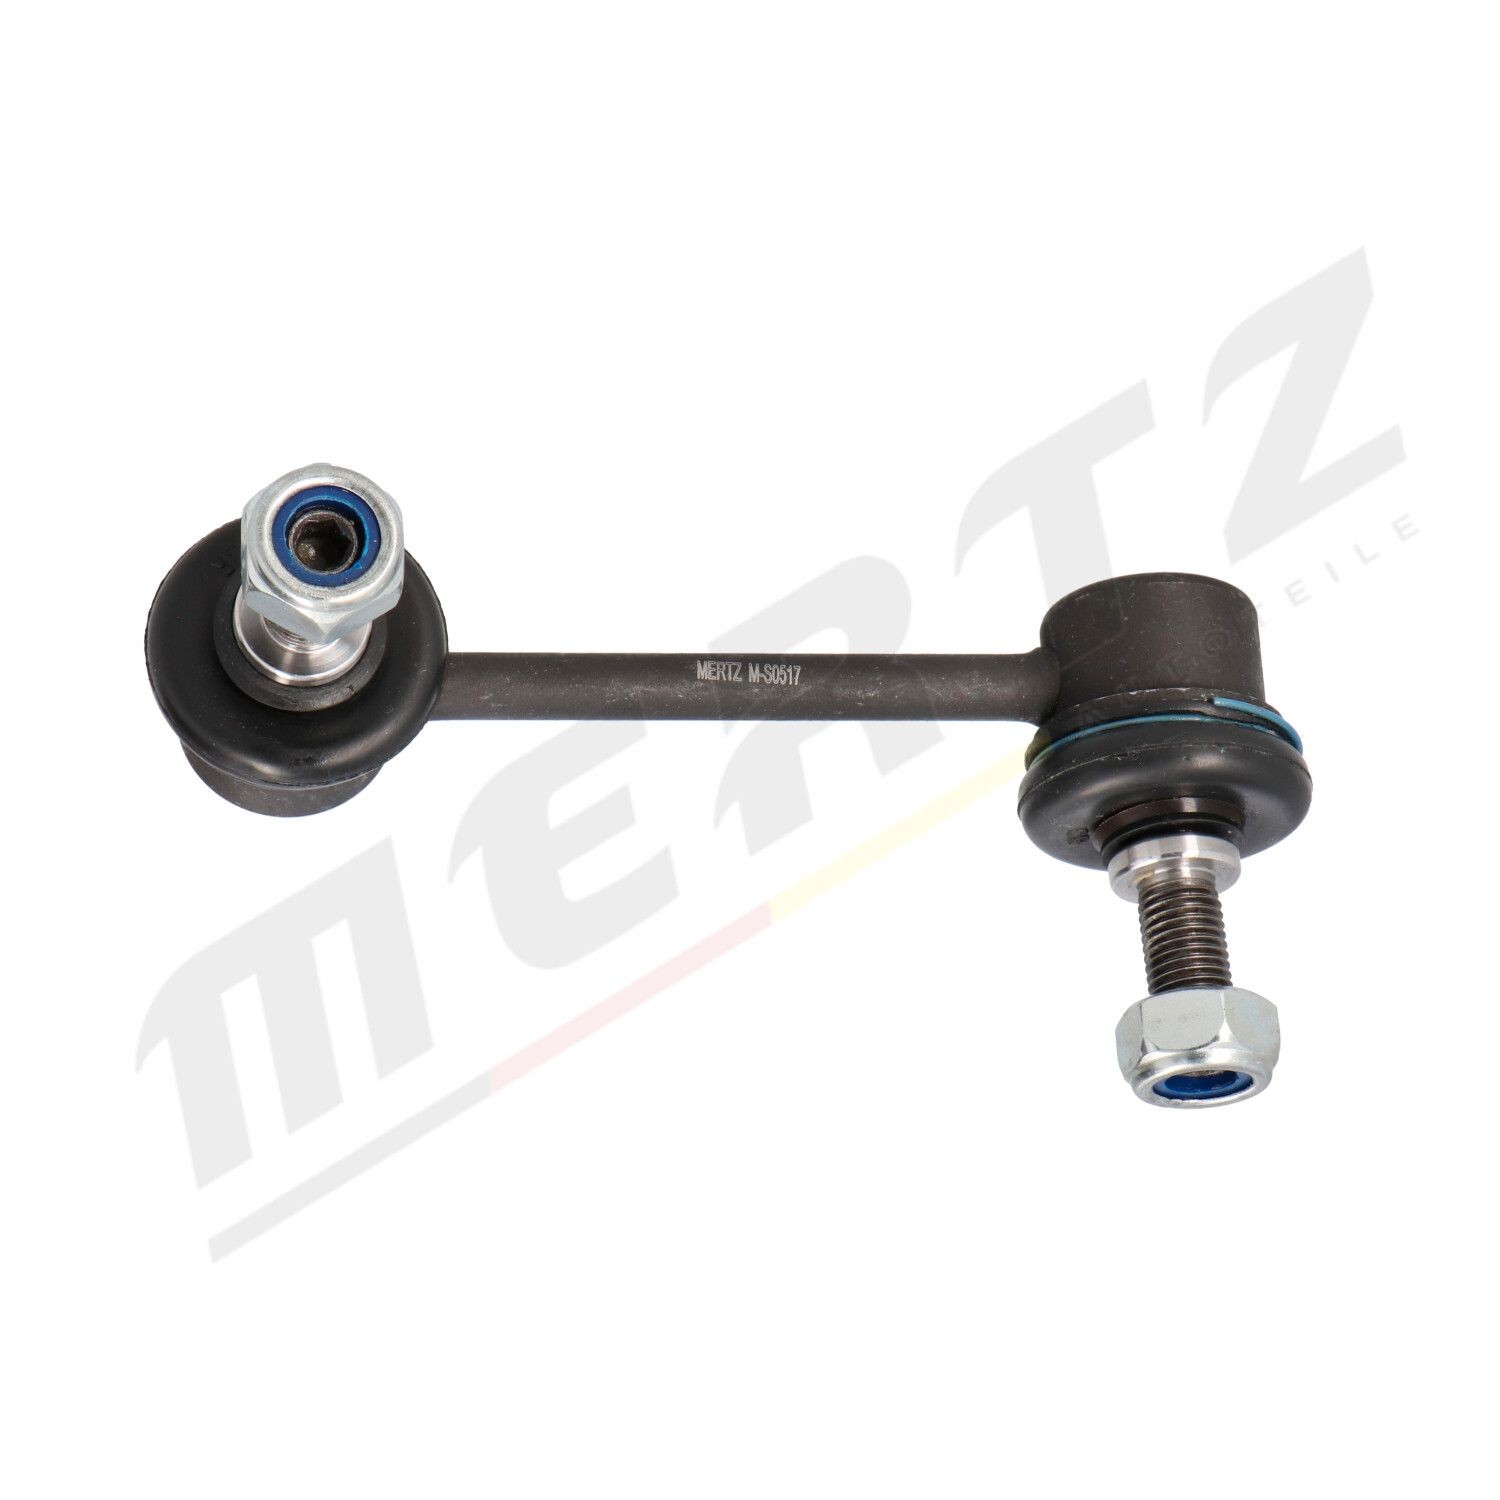 Anti-roll bar link MERTZ M-S0517 - Ford USA Probe I Suspension spare parts order